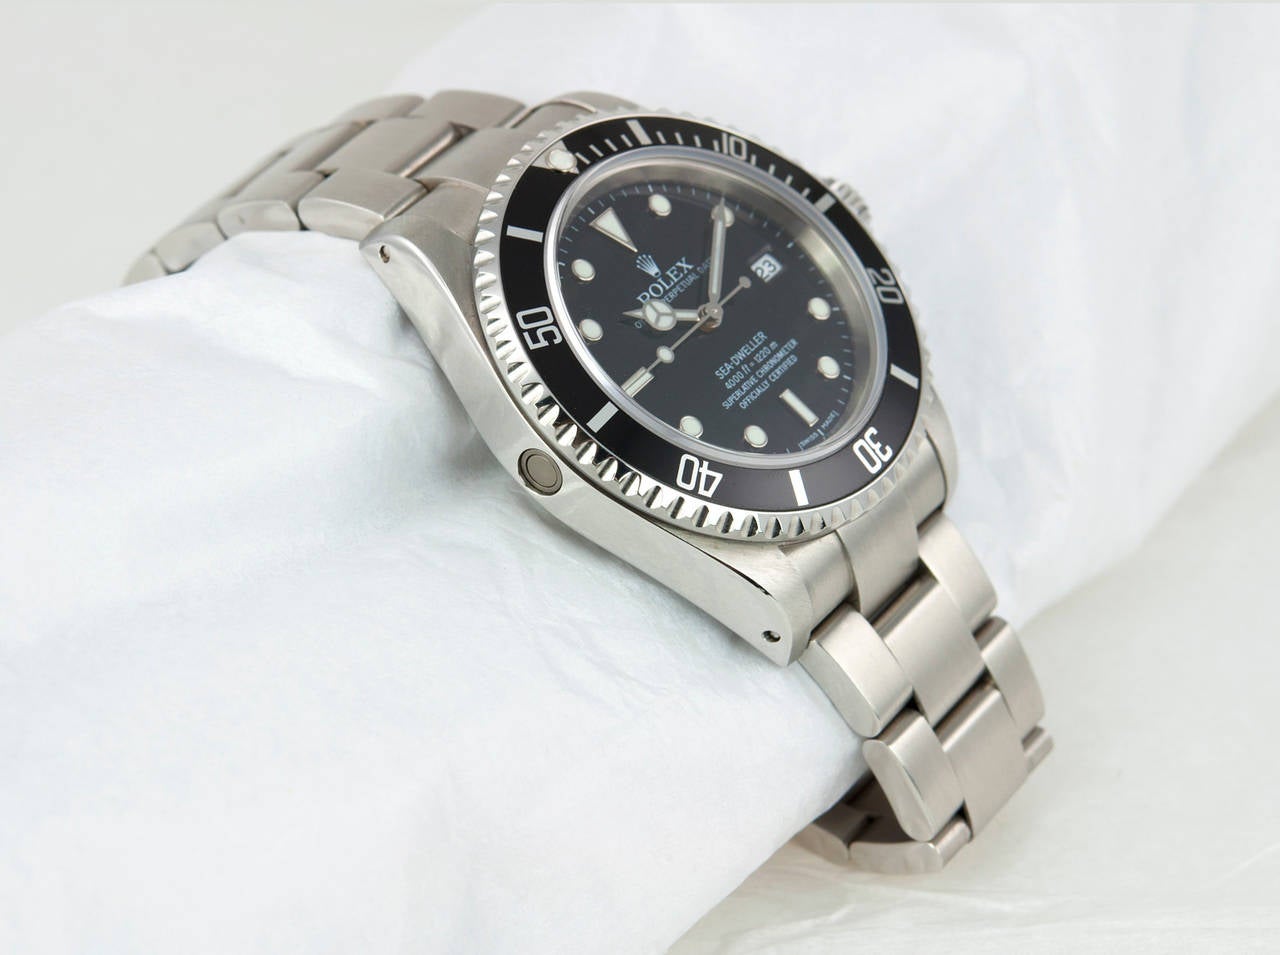 Rolex Stainless Steel Sea-Dweller Wristwatch Ref 16600, 2000 In Excellent Condition For Sale In Los Angeles, CA